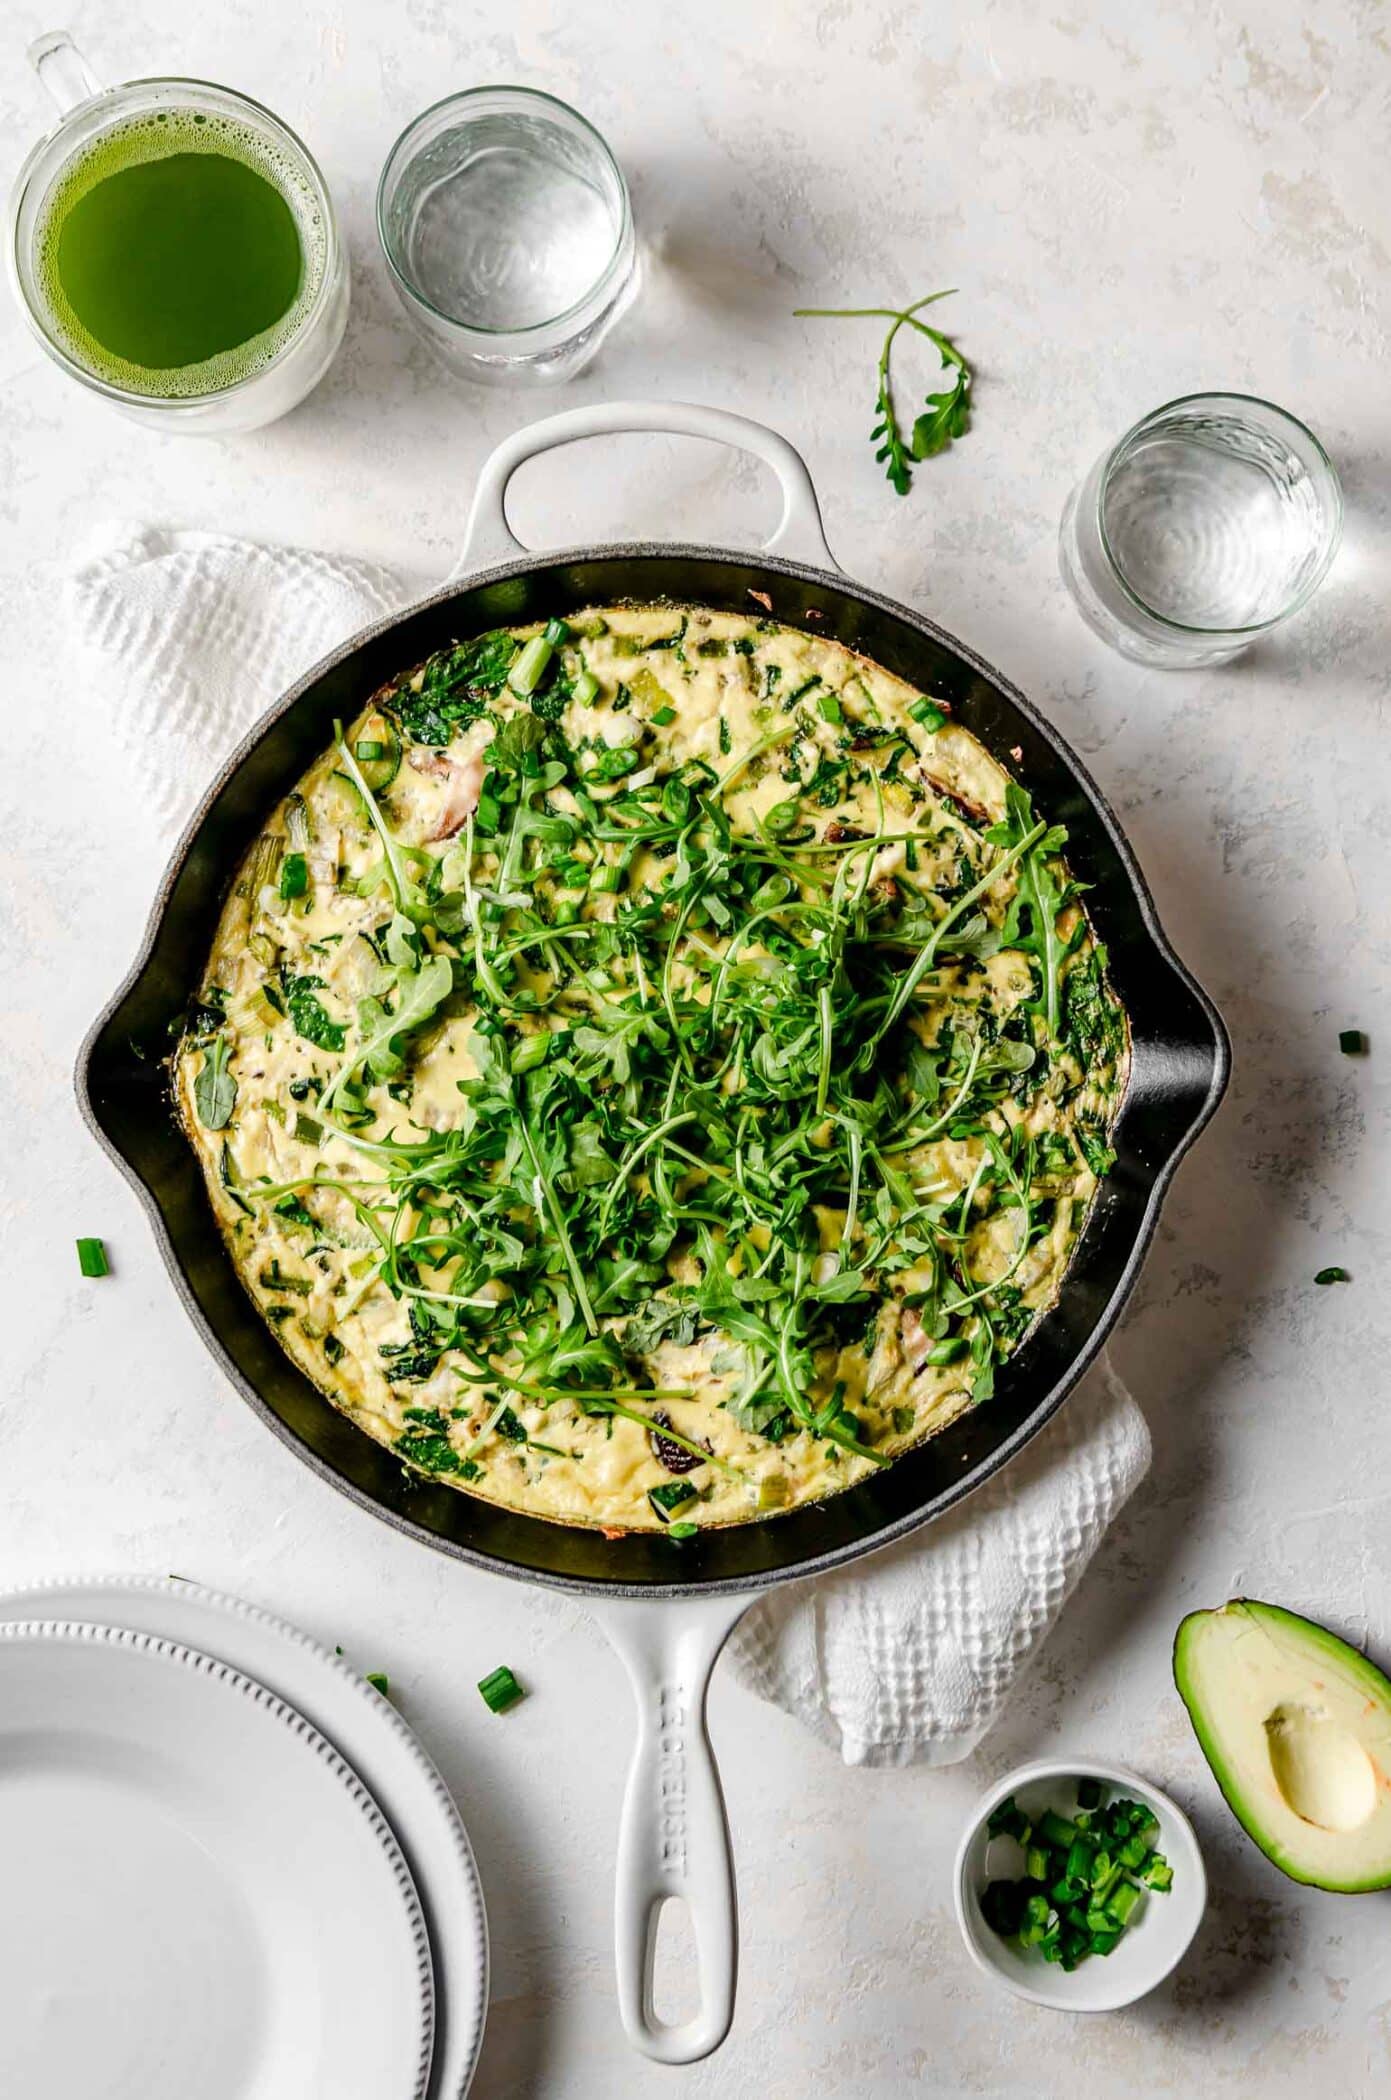 Easy, healthy green vegetable frittata in a cast iron pan made with asparagus, leeks, baby spinach, onions and shiitake mushrooms, served with green onions and avocado.